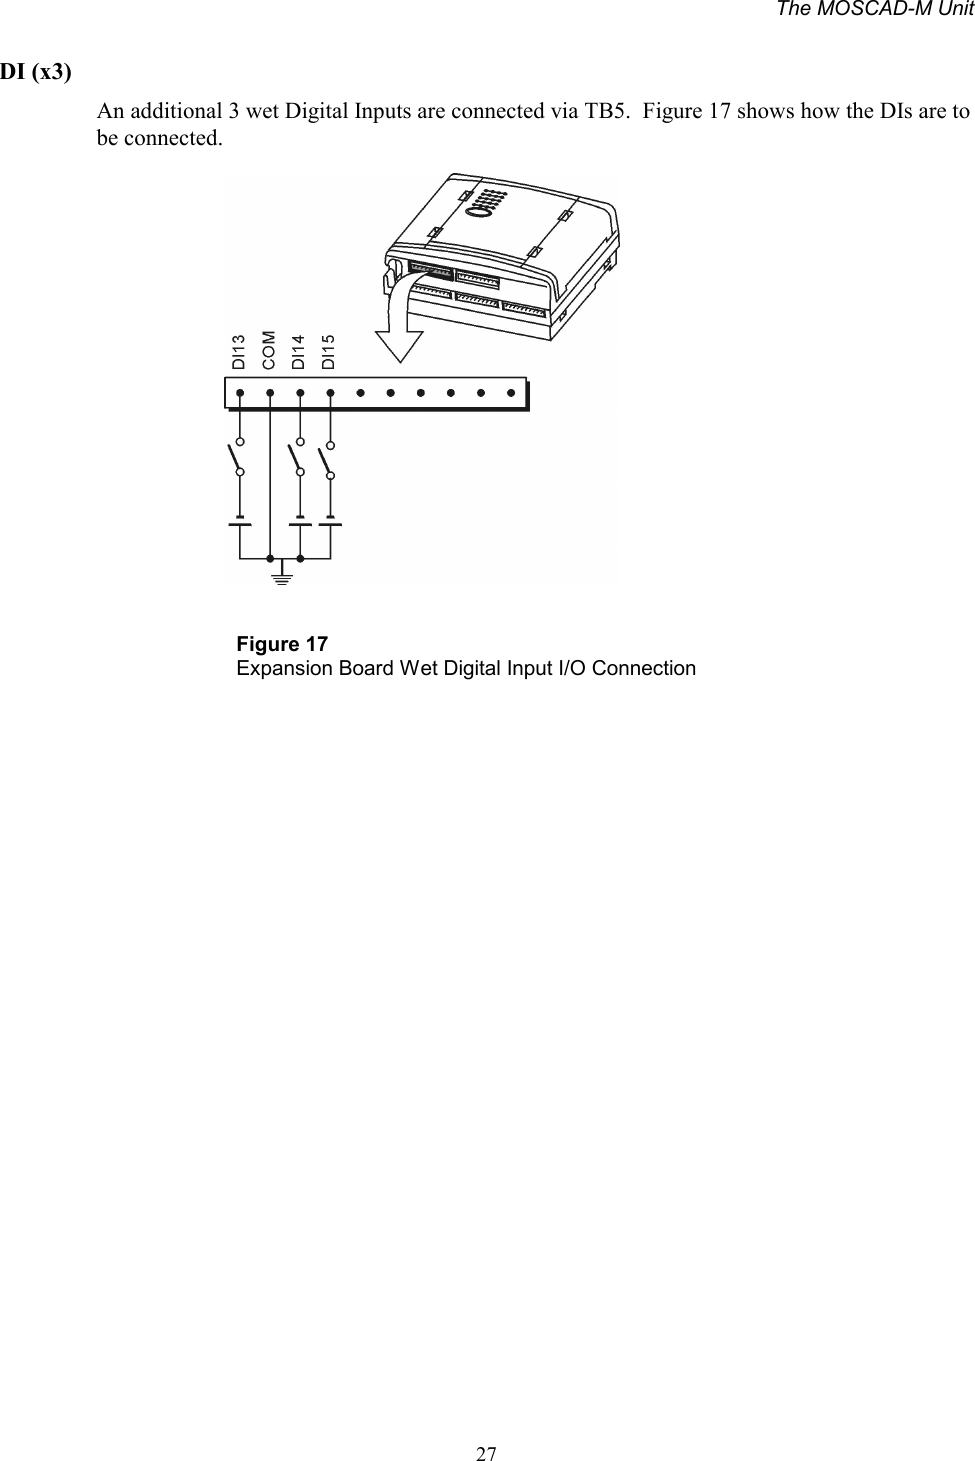 The MOSCAD-M Unit27DI (x3)An additional 3 wet Digital Inputs are connected via TB5.  Figure 17 shows how the DIs are tobe connected.Figure 17Expansion Board Wet Digital Input I/O Connection